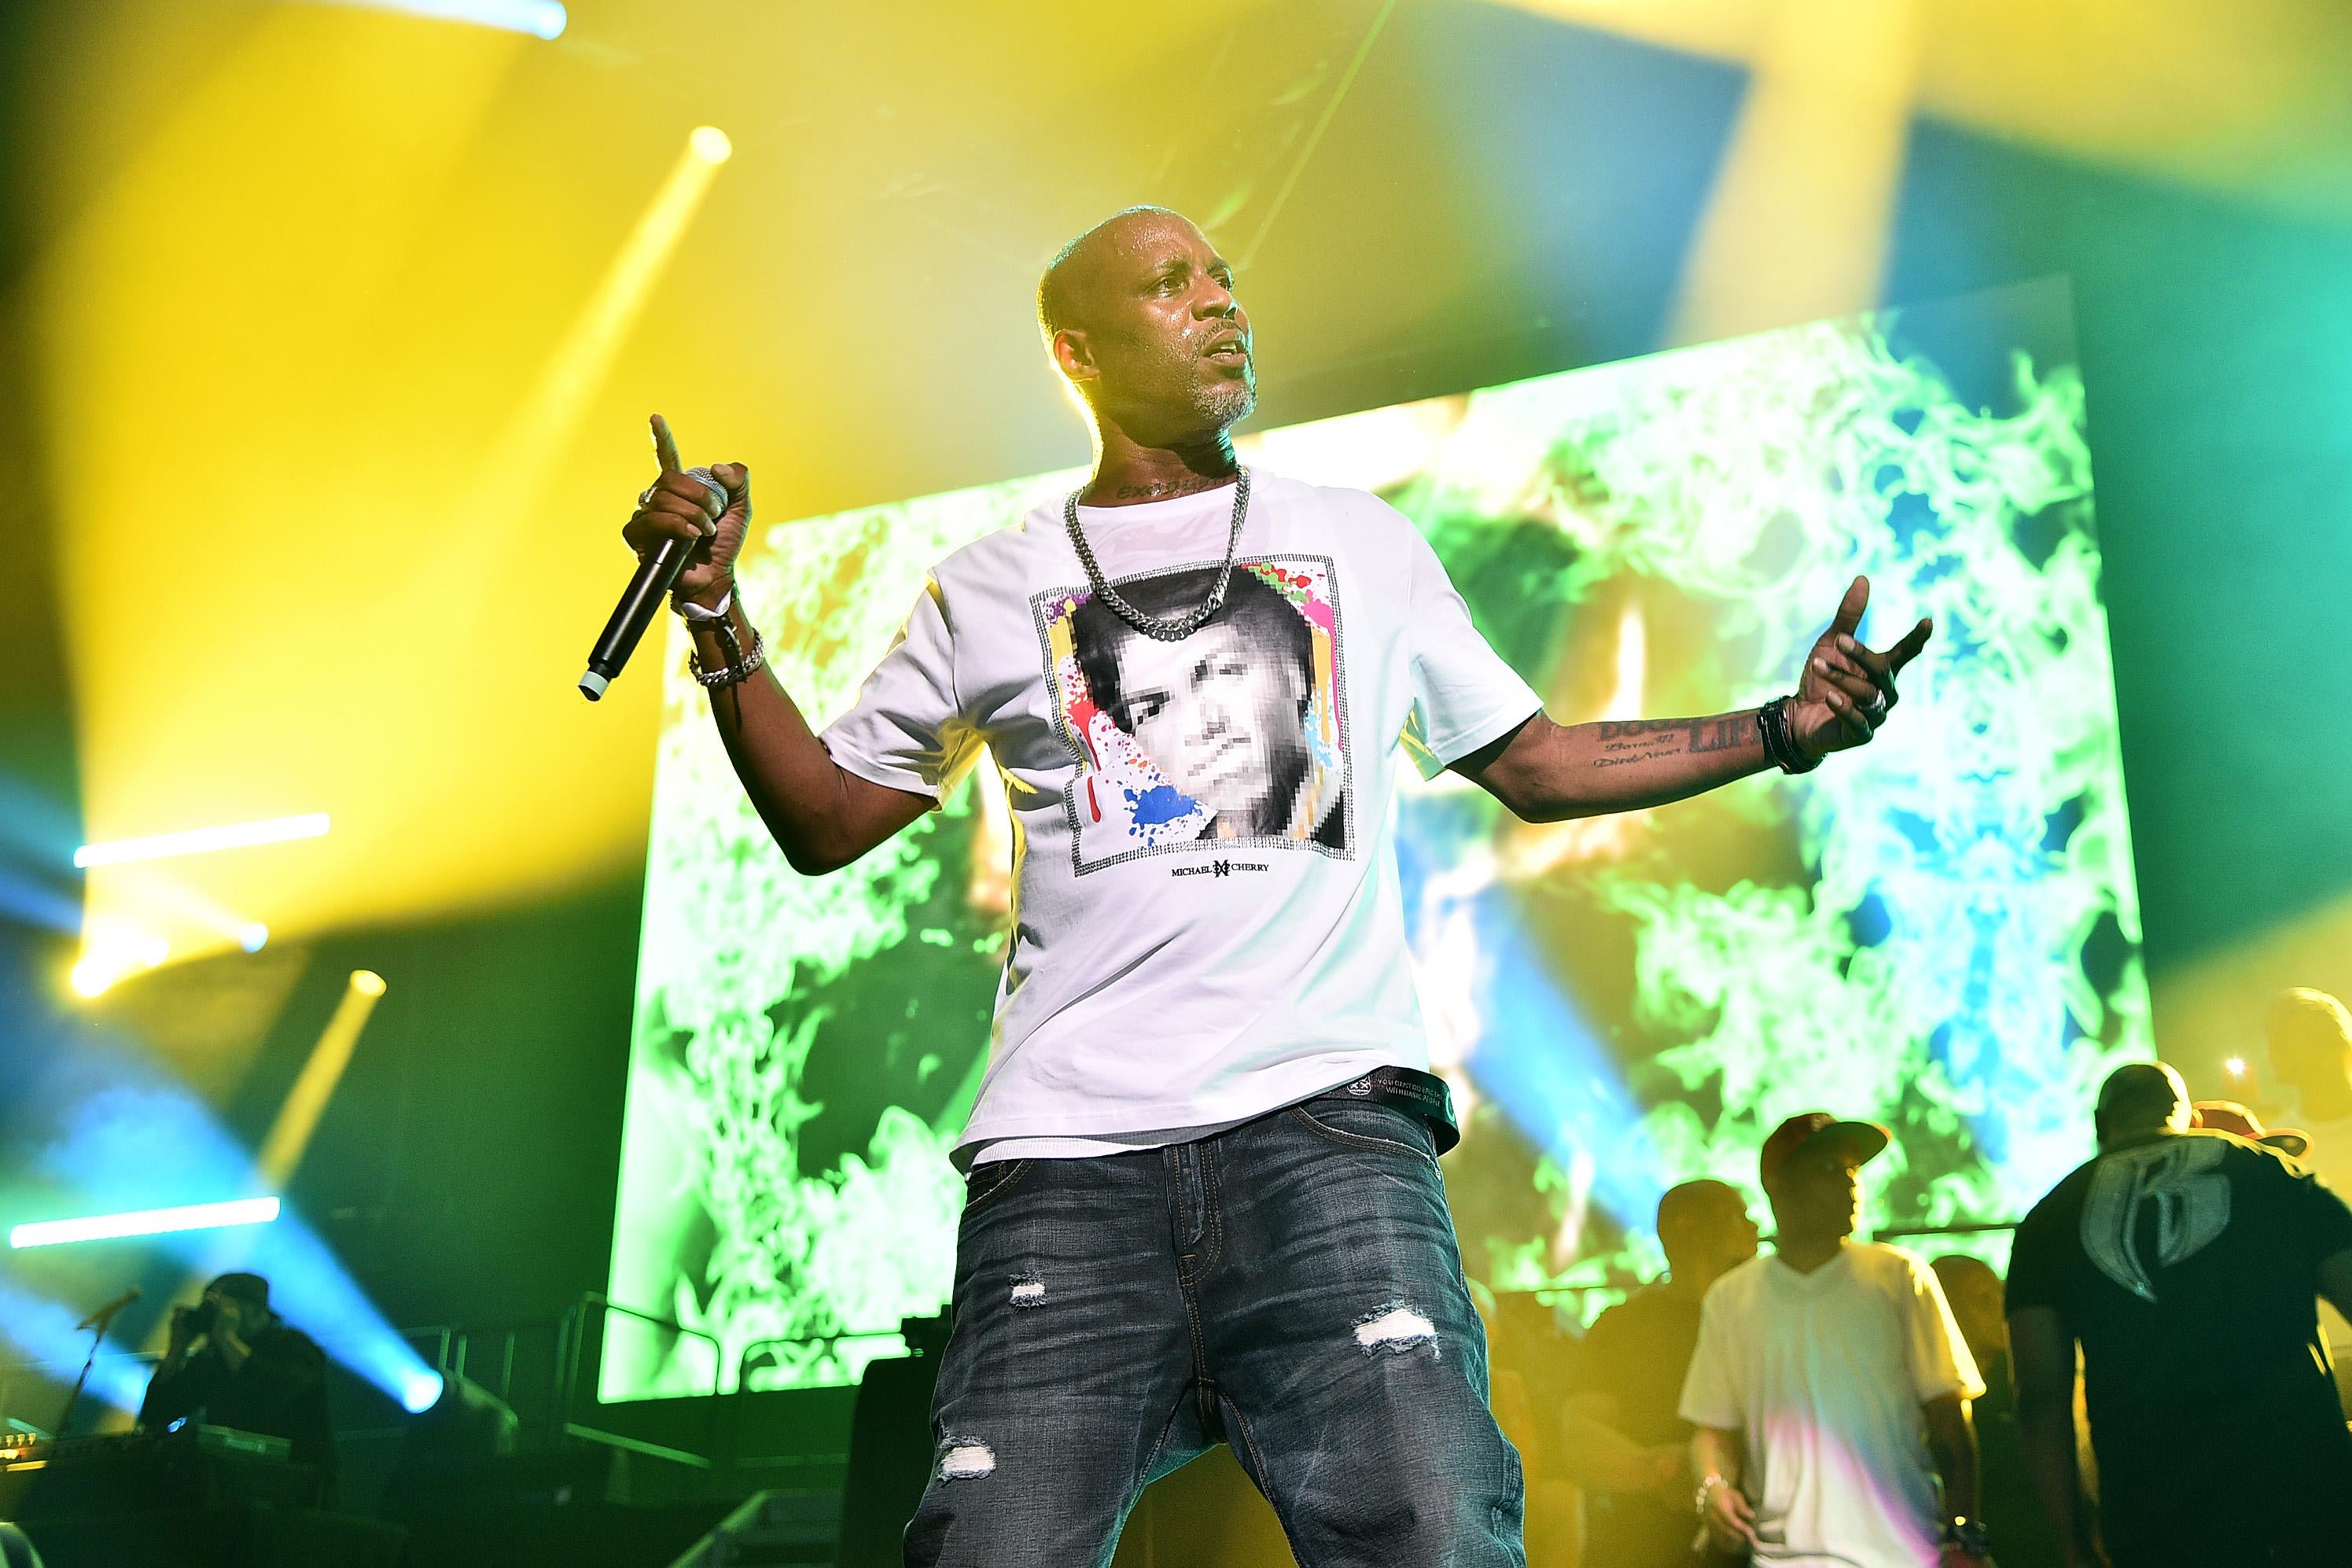 DMX performs at Masters Of Ceremony 2019 at Barclays Center on June 28, 2019 in New York City. (Photo by Theo Wargo/Getty Images)